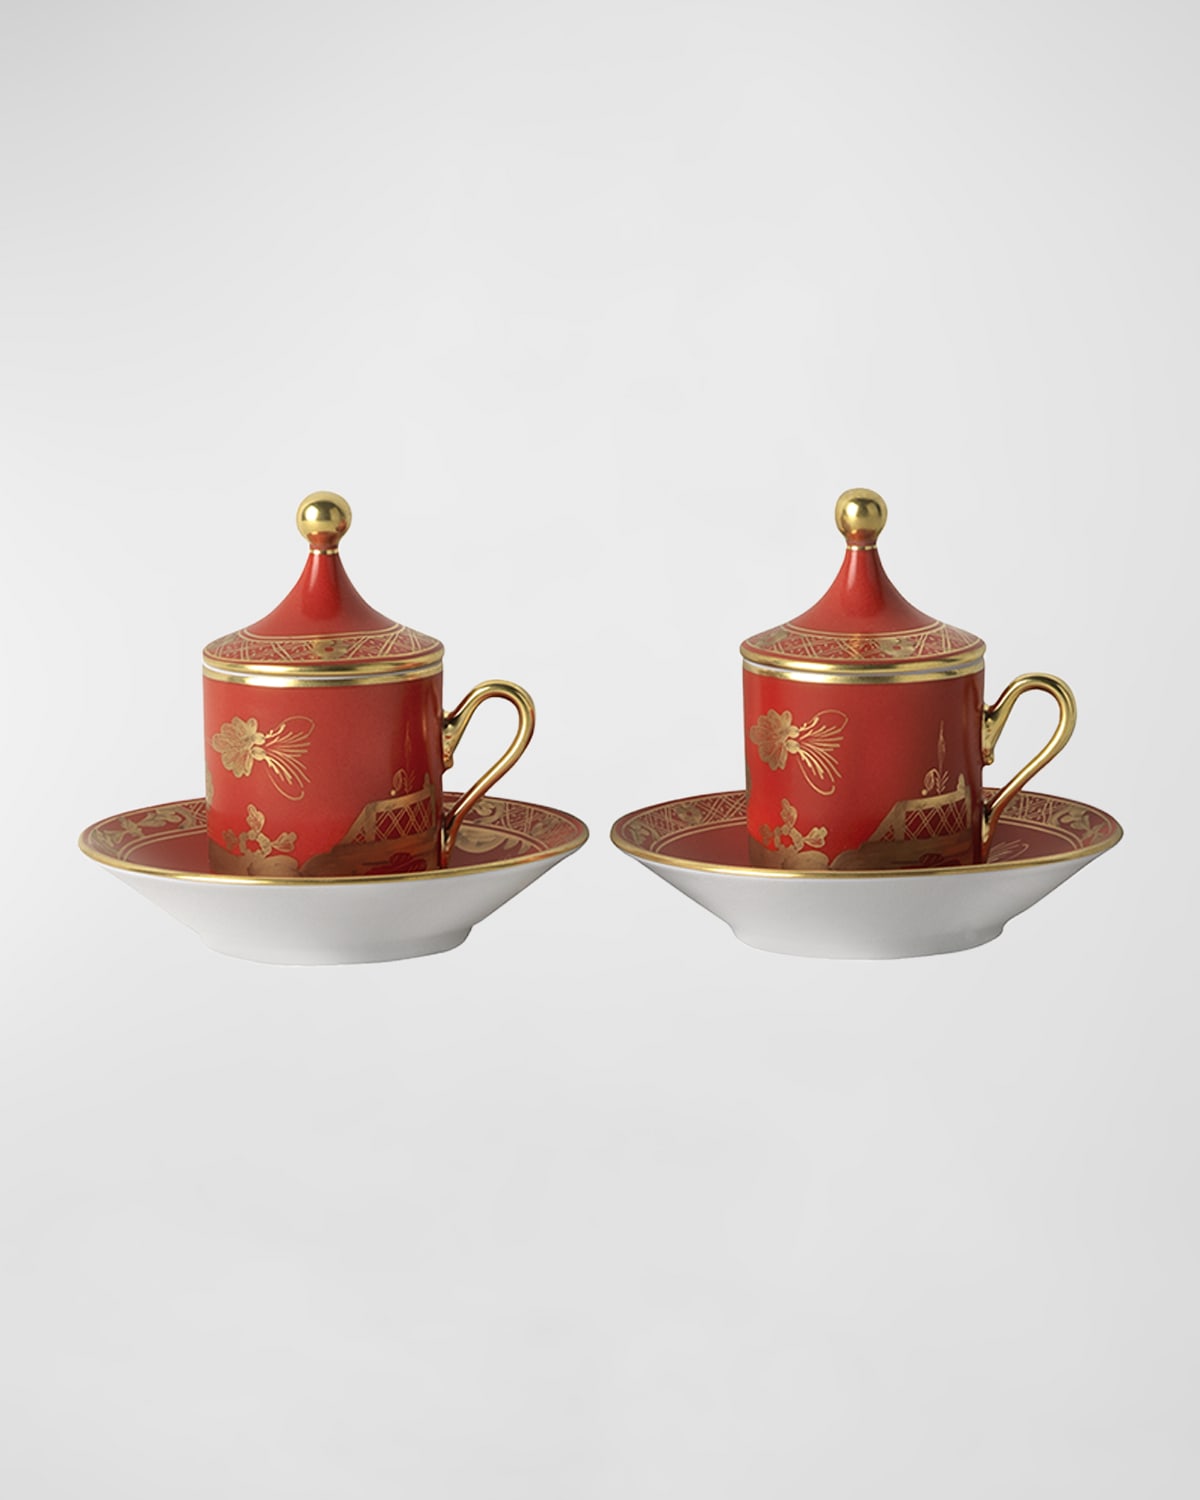 Ginori 1735 Set-of-two Porcelain Coffee Cup Set In Red